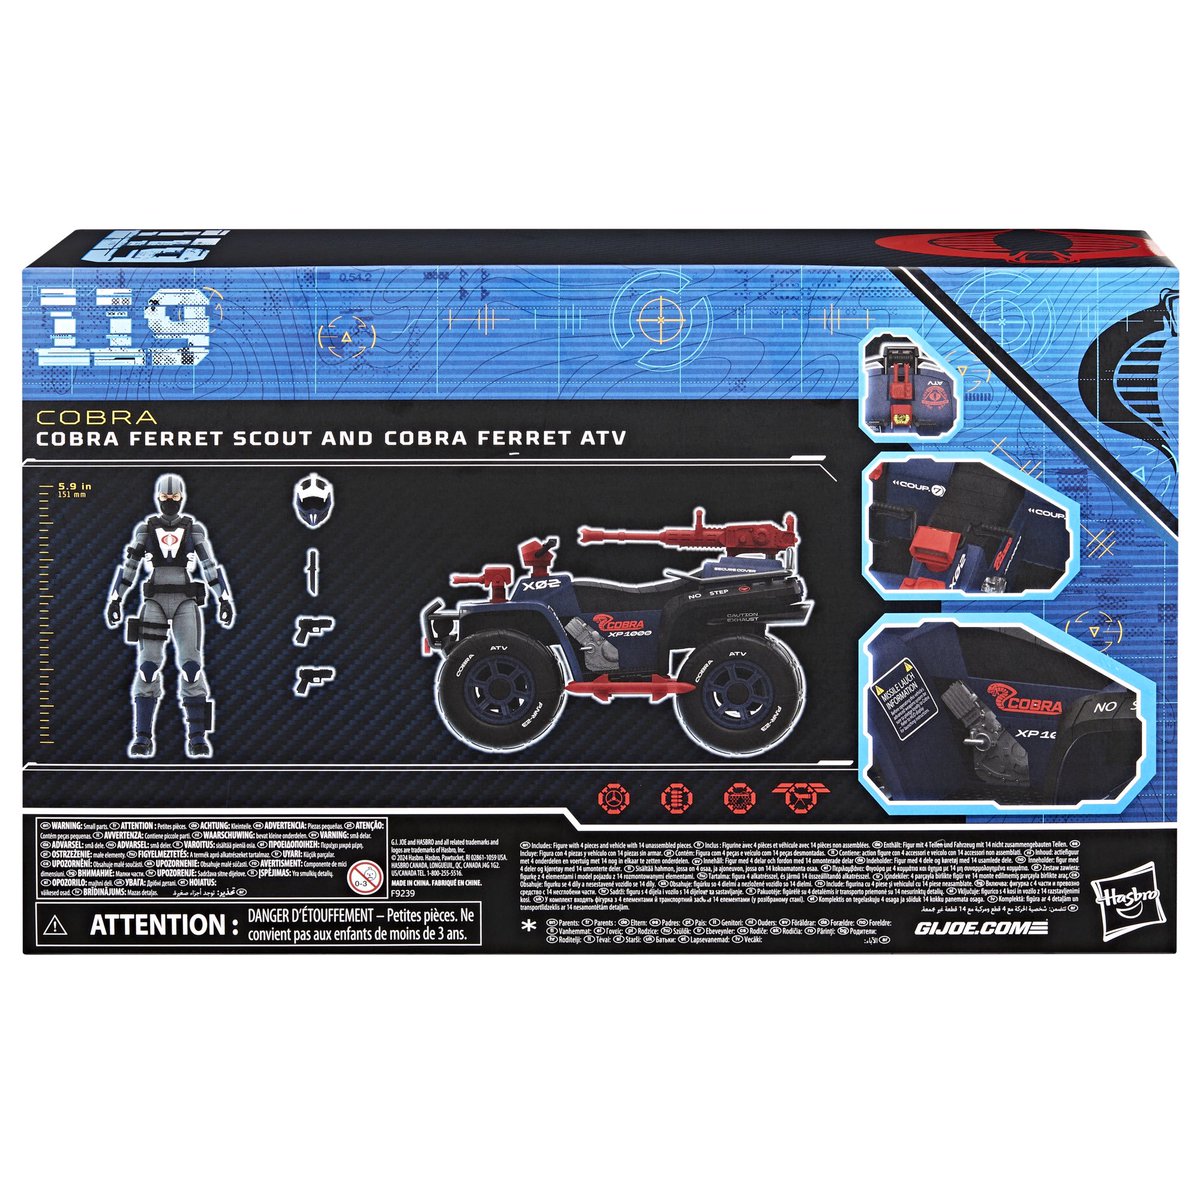 Official product photography for the Hasbro G.I. Joe Classified Series 6” Cobra Ferret ATV + Ferret Scout. $54.99 MSRP, I believe Hasbro Pulse exclusive.